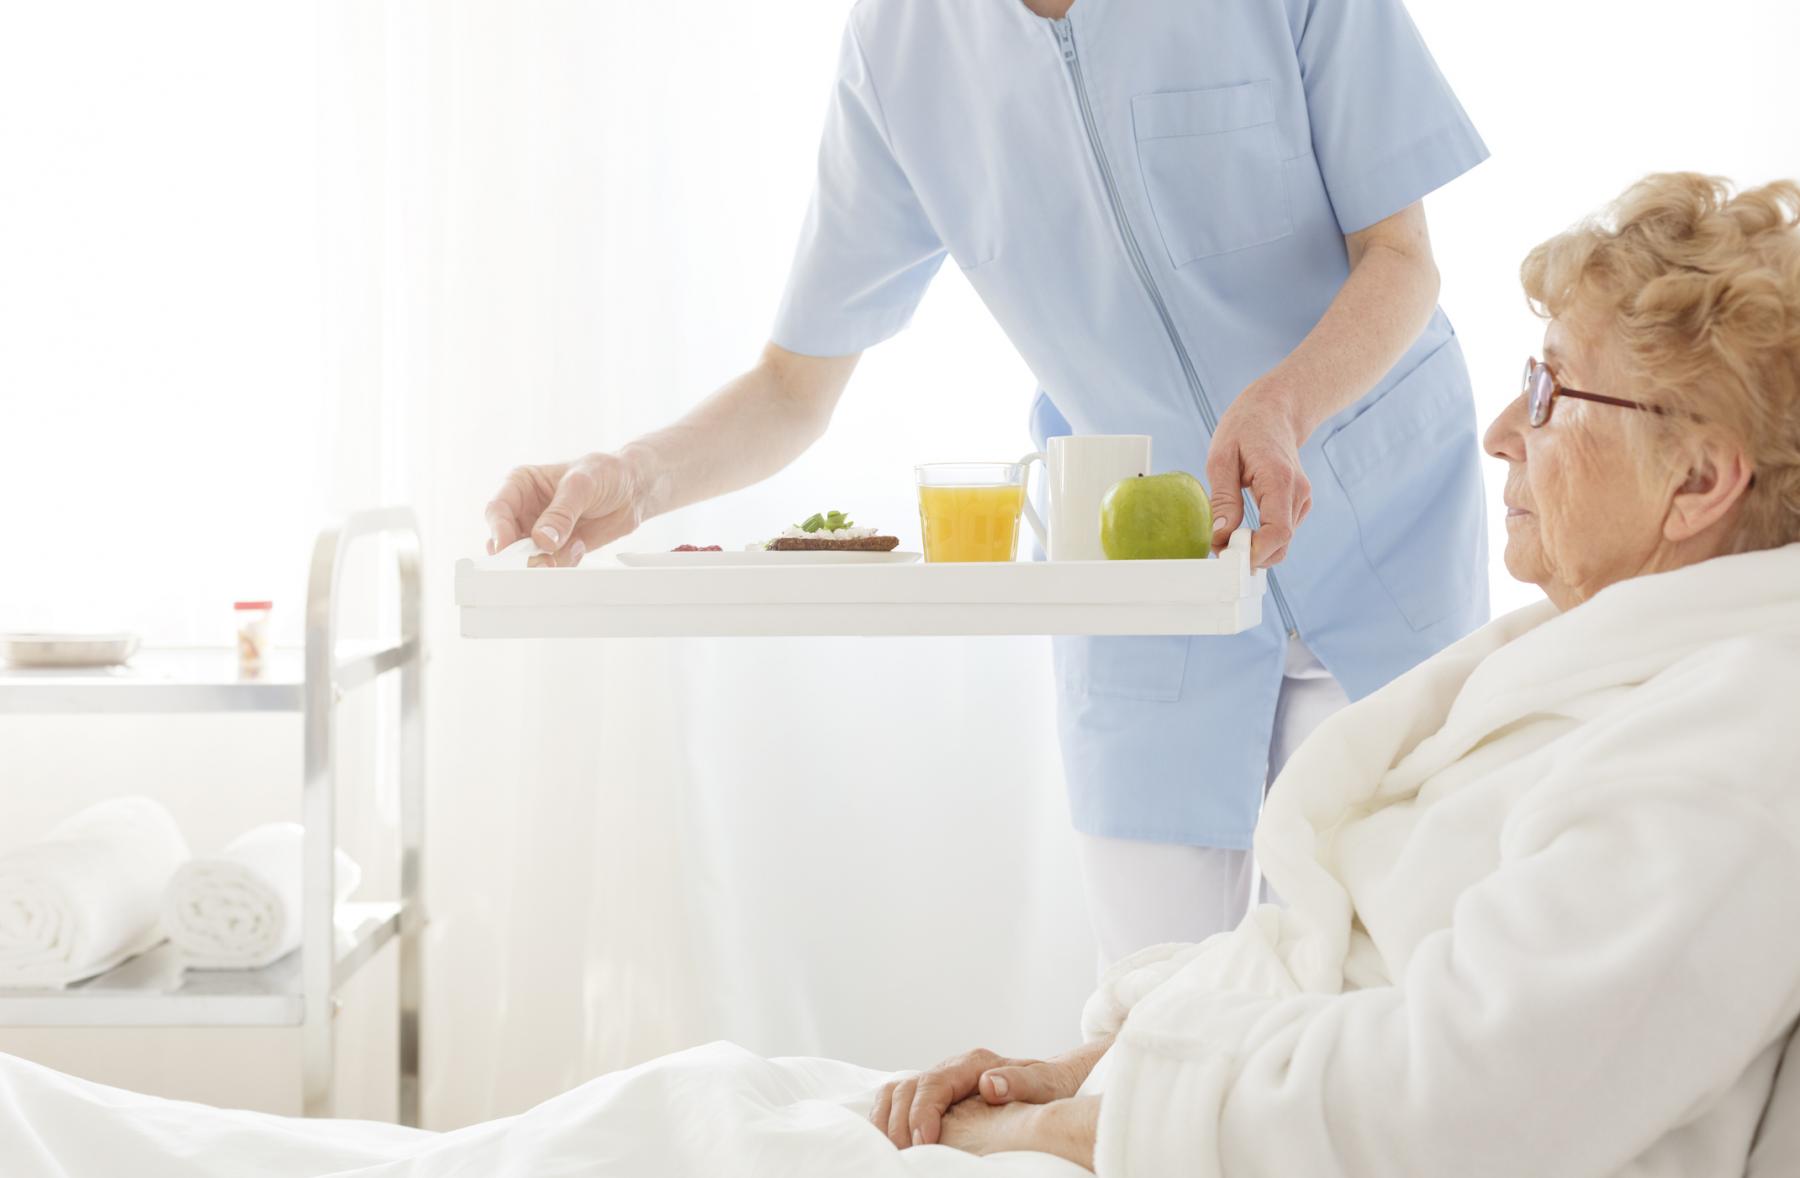 A patient lying in a hospital bed is served a tray of food